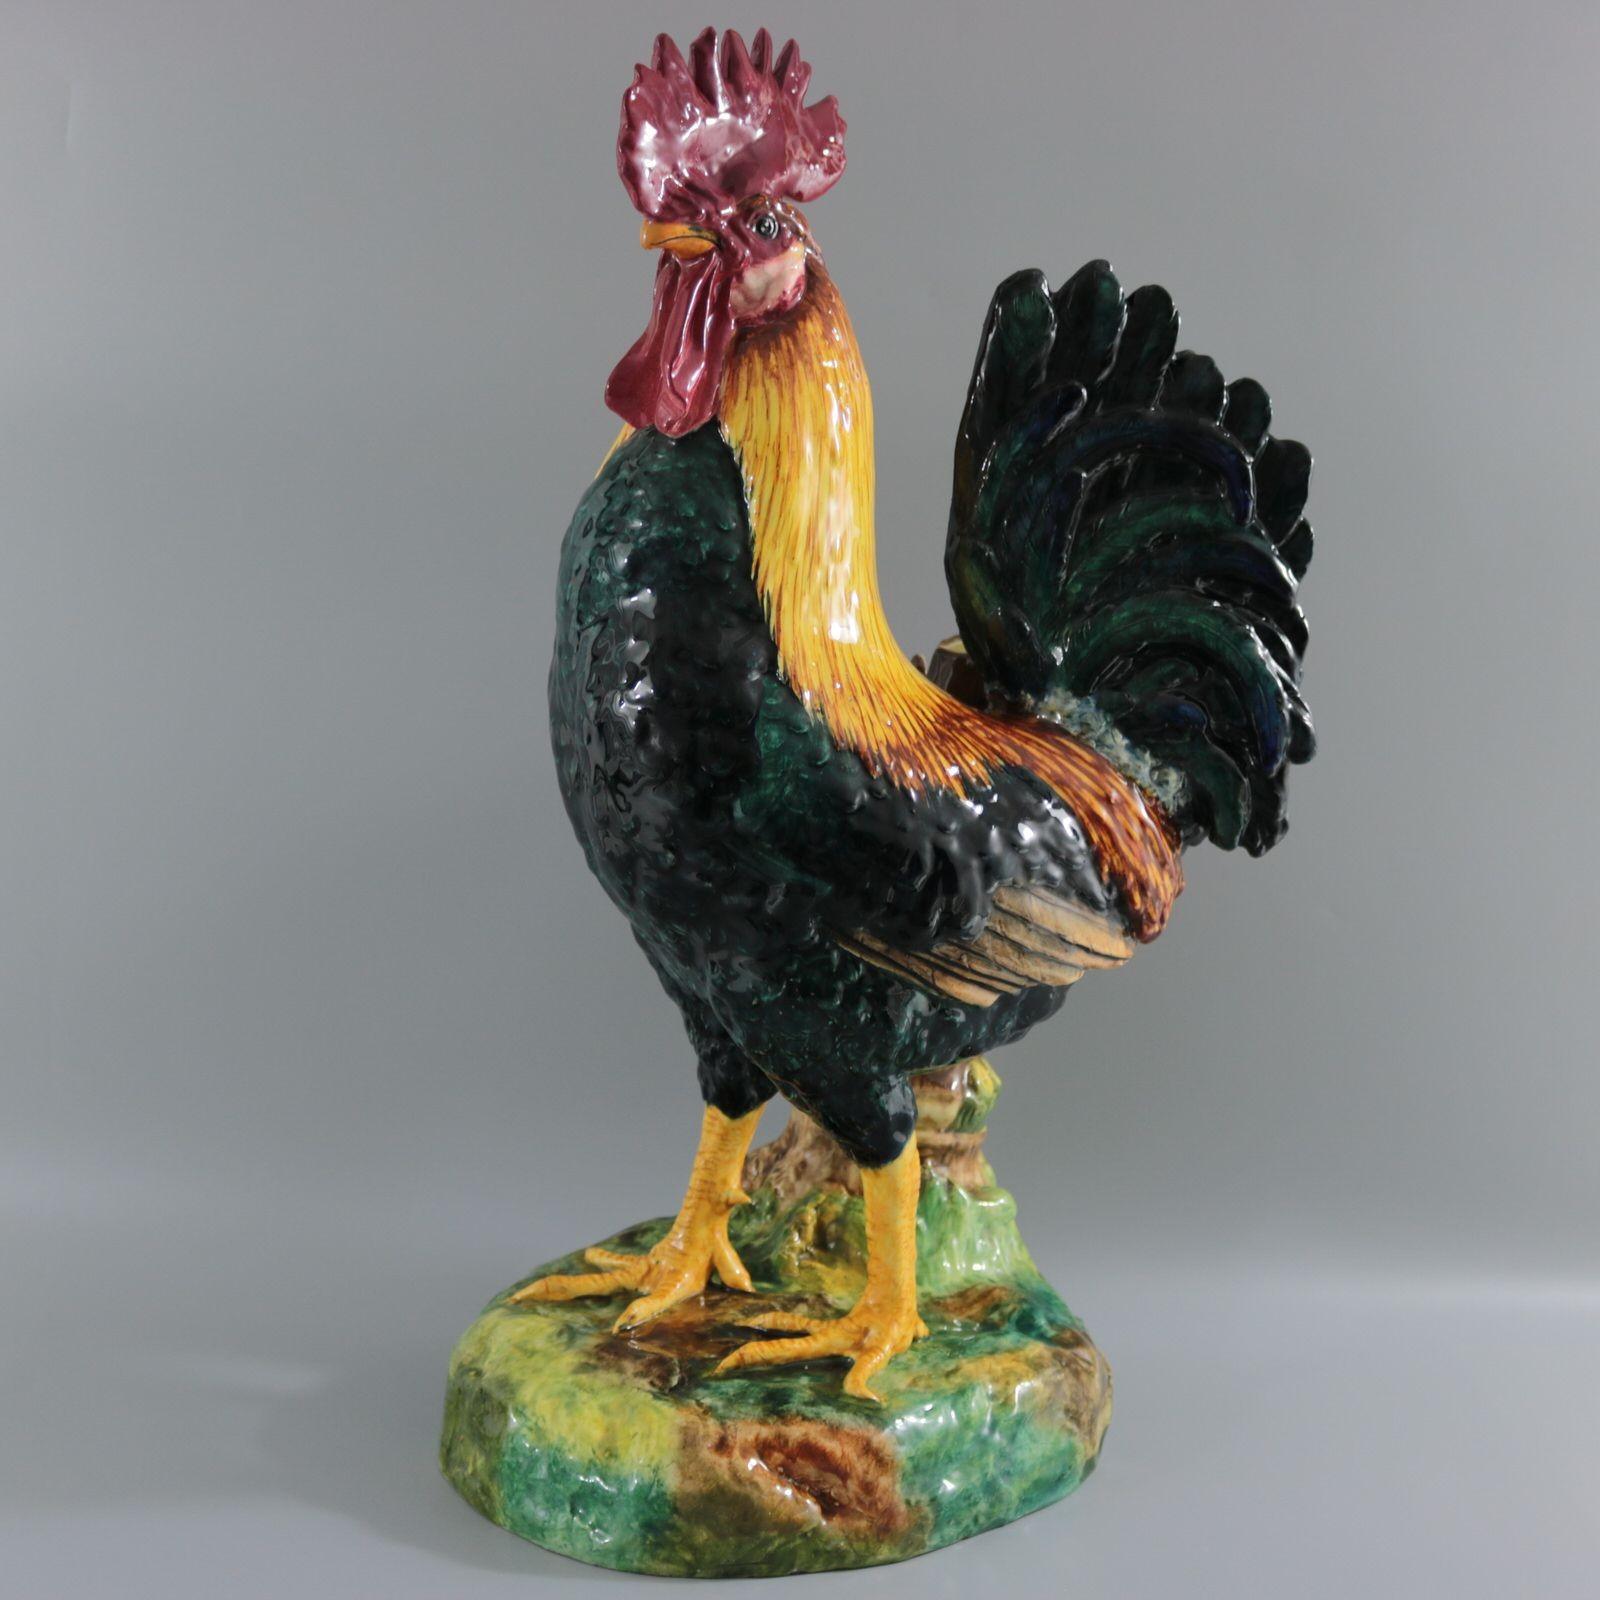 Delphin Massier French Majolica figural vase which features an exquisitely colourful rooster / cockerel, standing in front of a bamboo-effect vase. Colouration: yellow, teal blue green, are predominant. The piece bears maker's marks for the Delphin